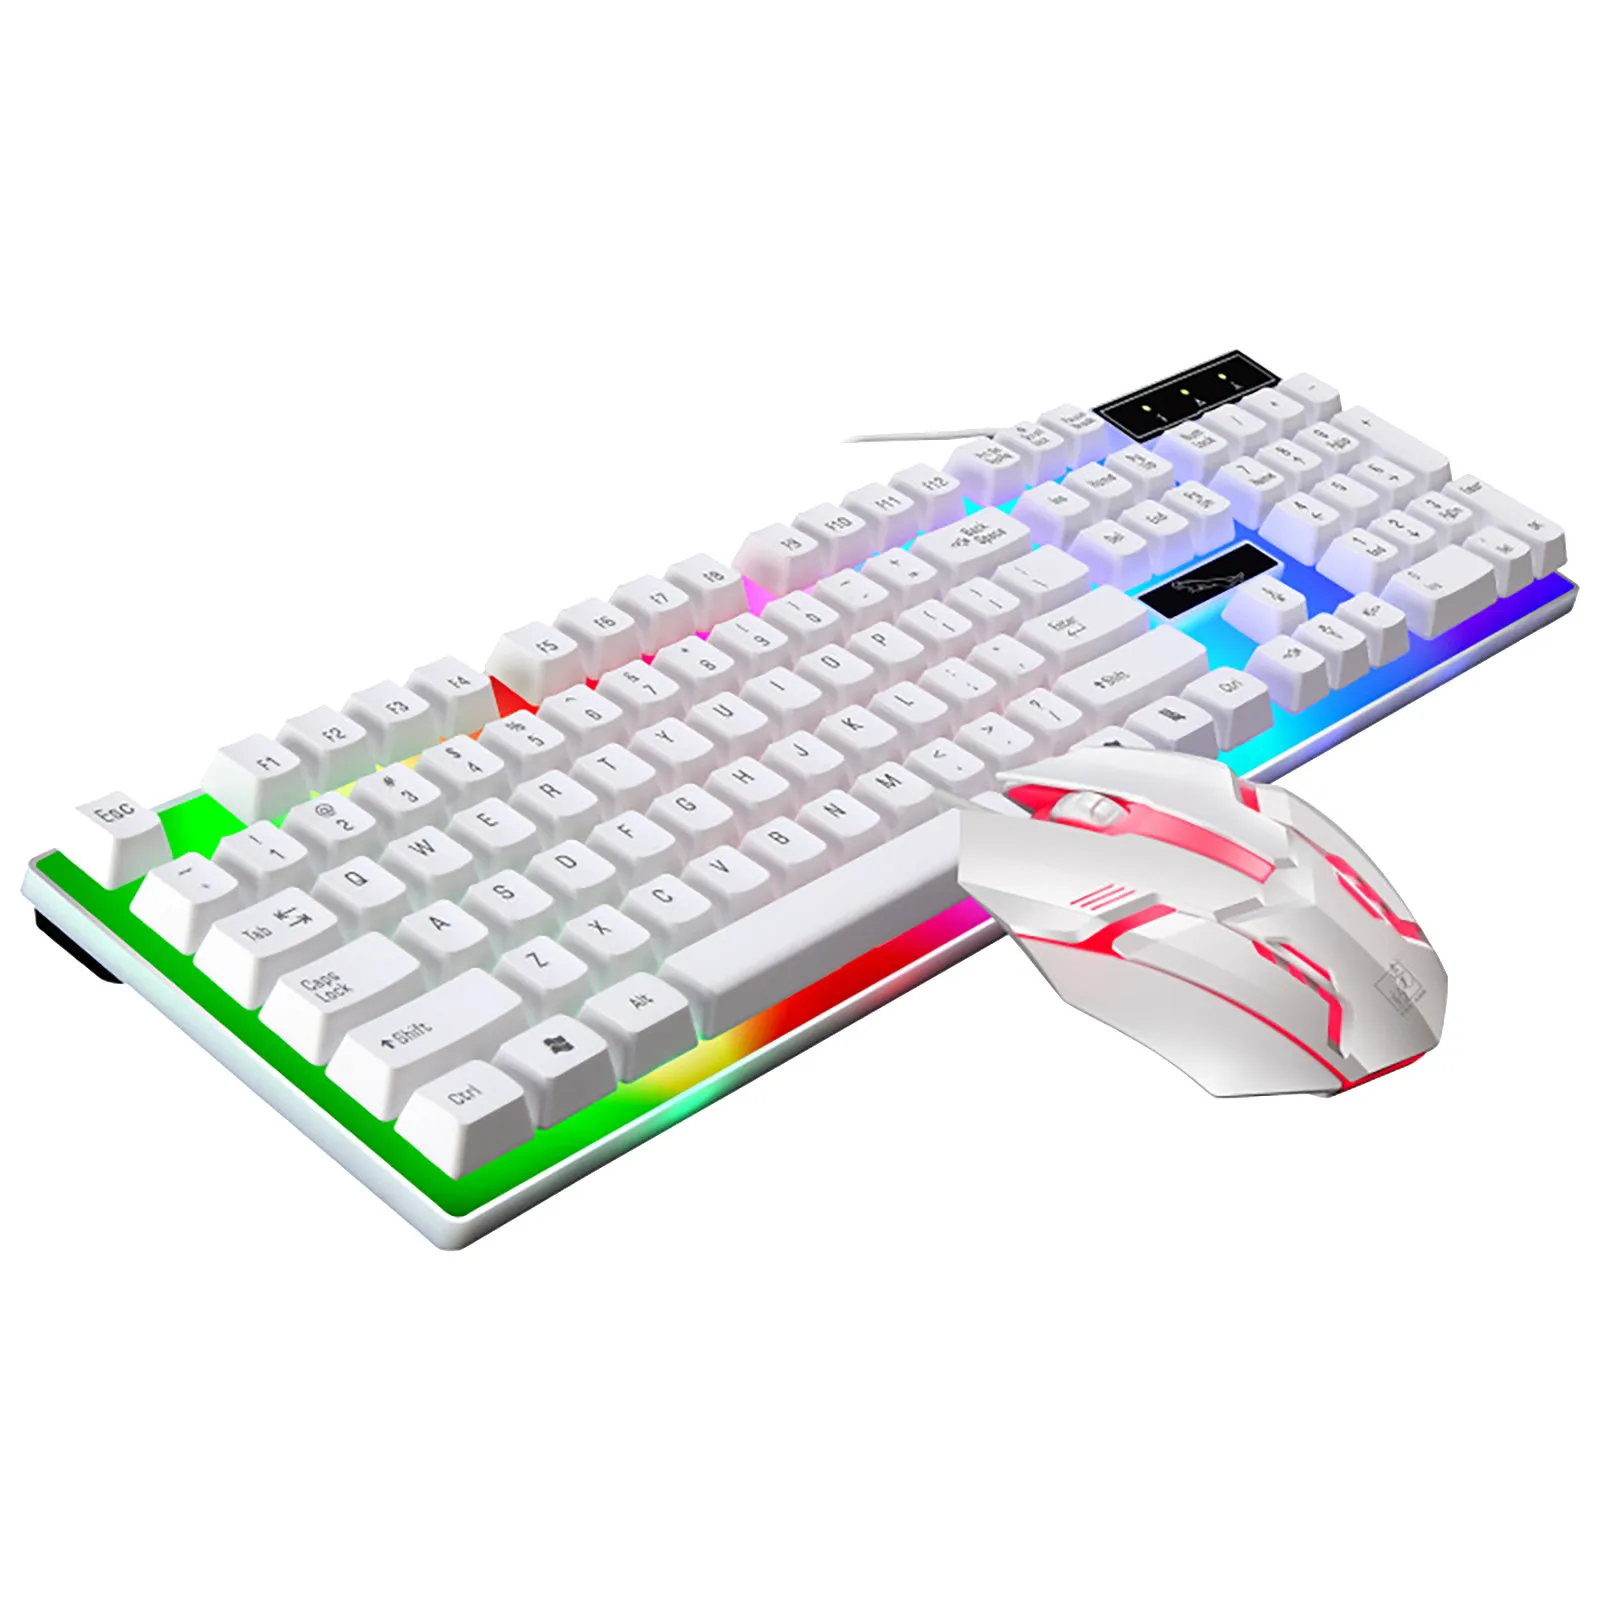 

2021 New Colorful LED Fashion Backlit Wired Keyboard Mouse Set Gaming Keyboard Gamer Mouse tripod Keyboard Home Office PC Laptop